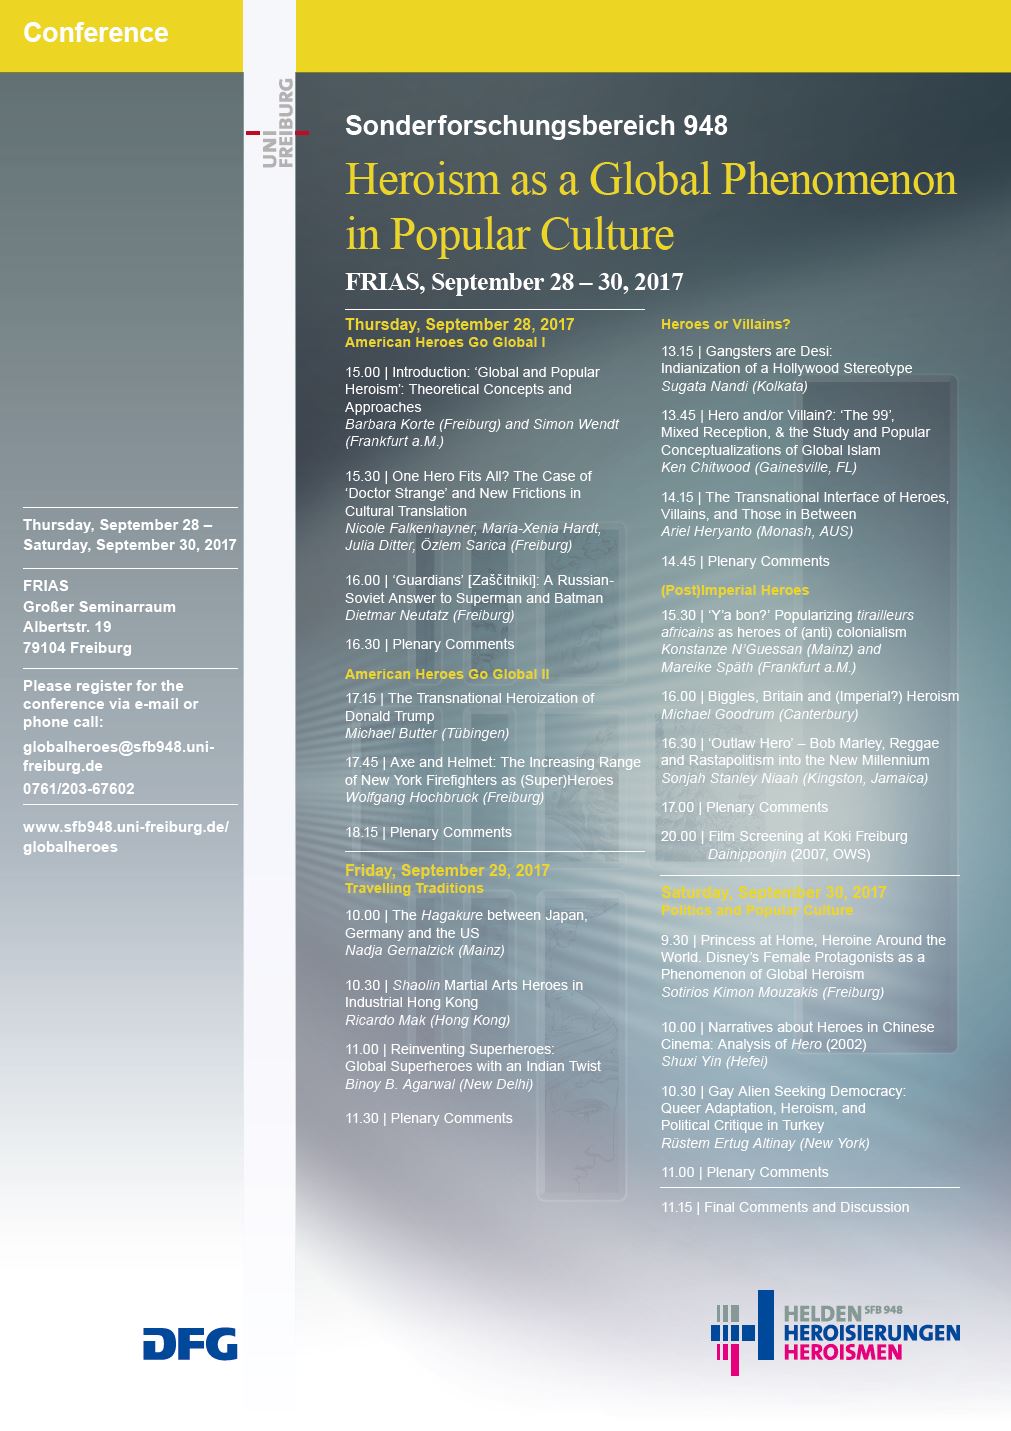 Conference | "Heroism as a Global Phenomenon in Popular Culture" 